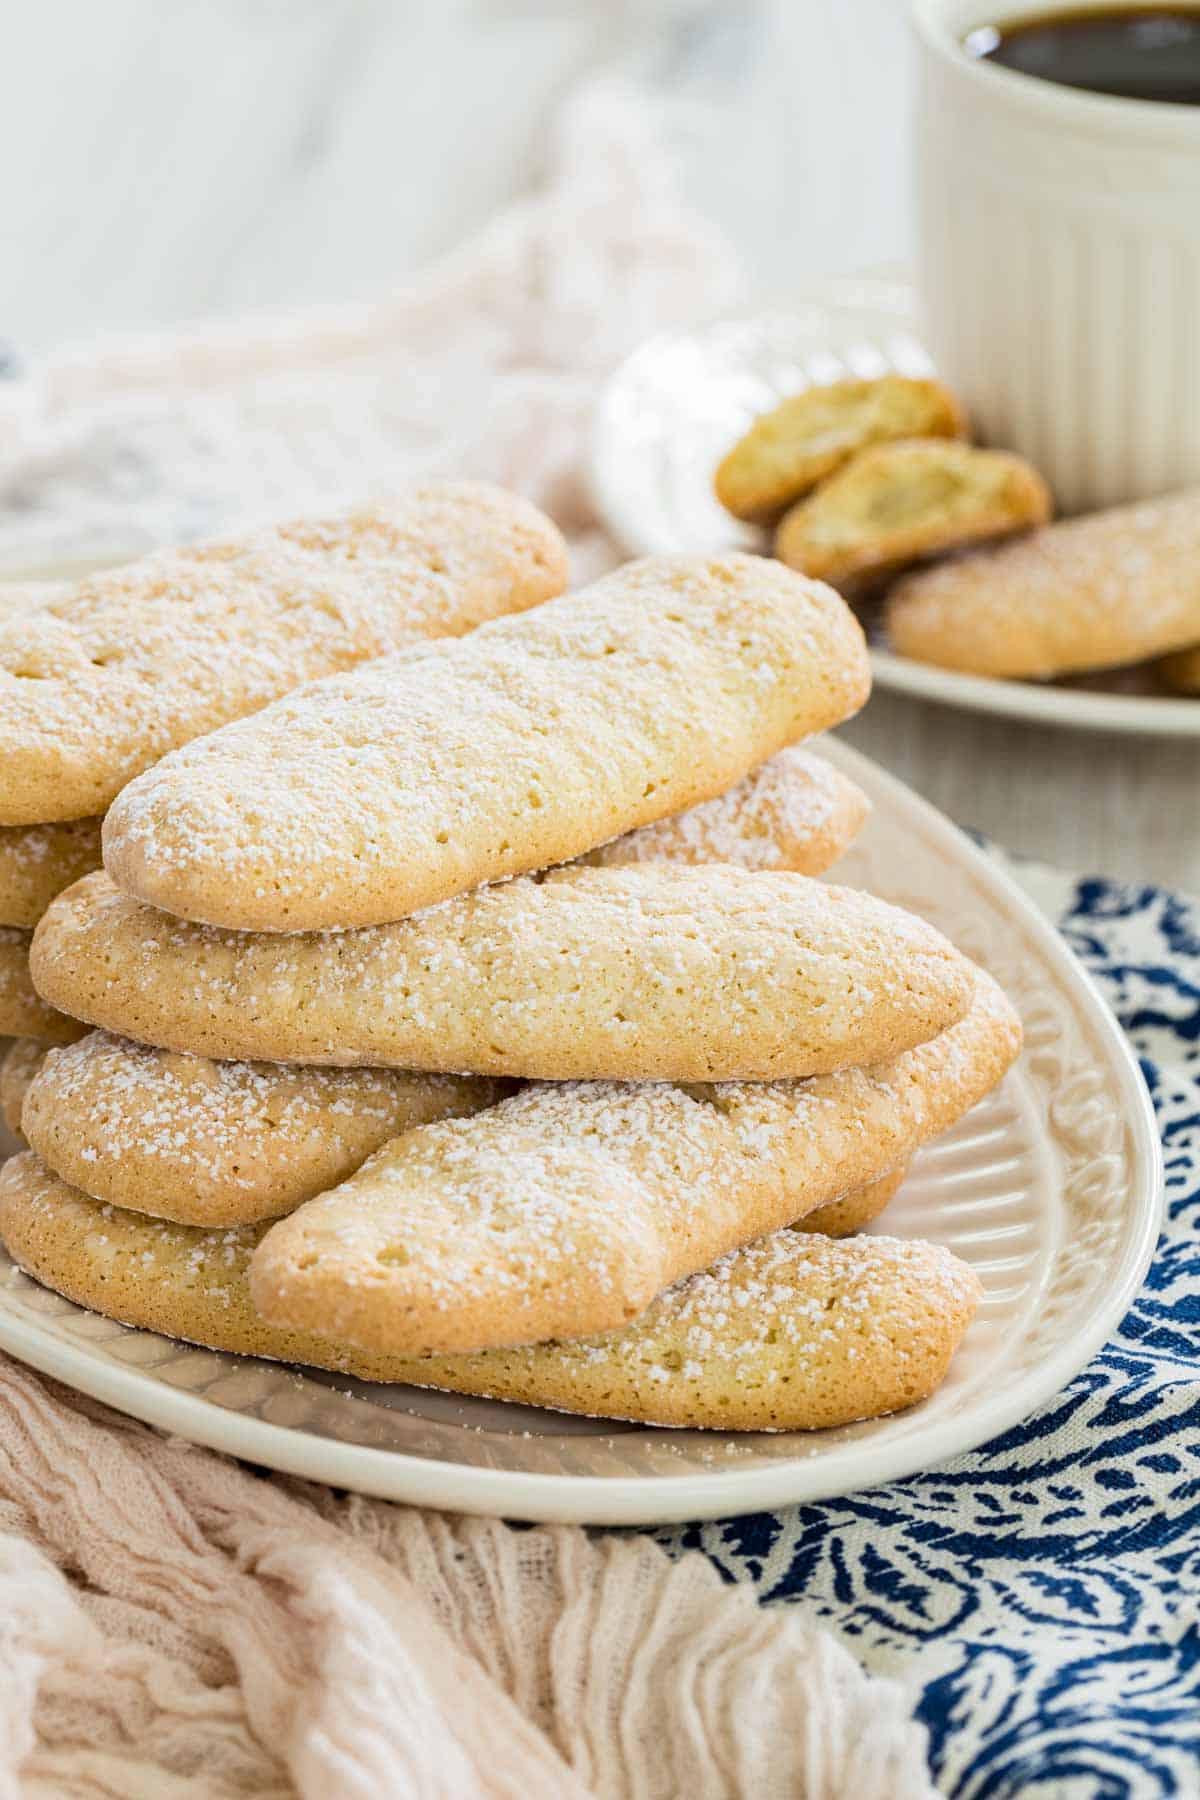 Gluten free ladyfingers stacked on a white plate, with a cup of coffee in the background.